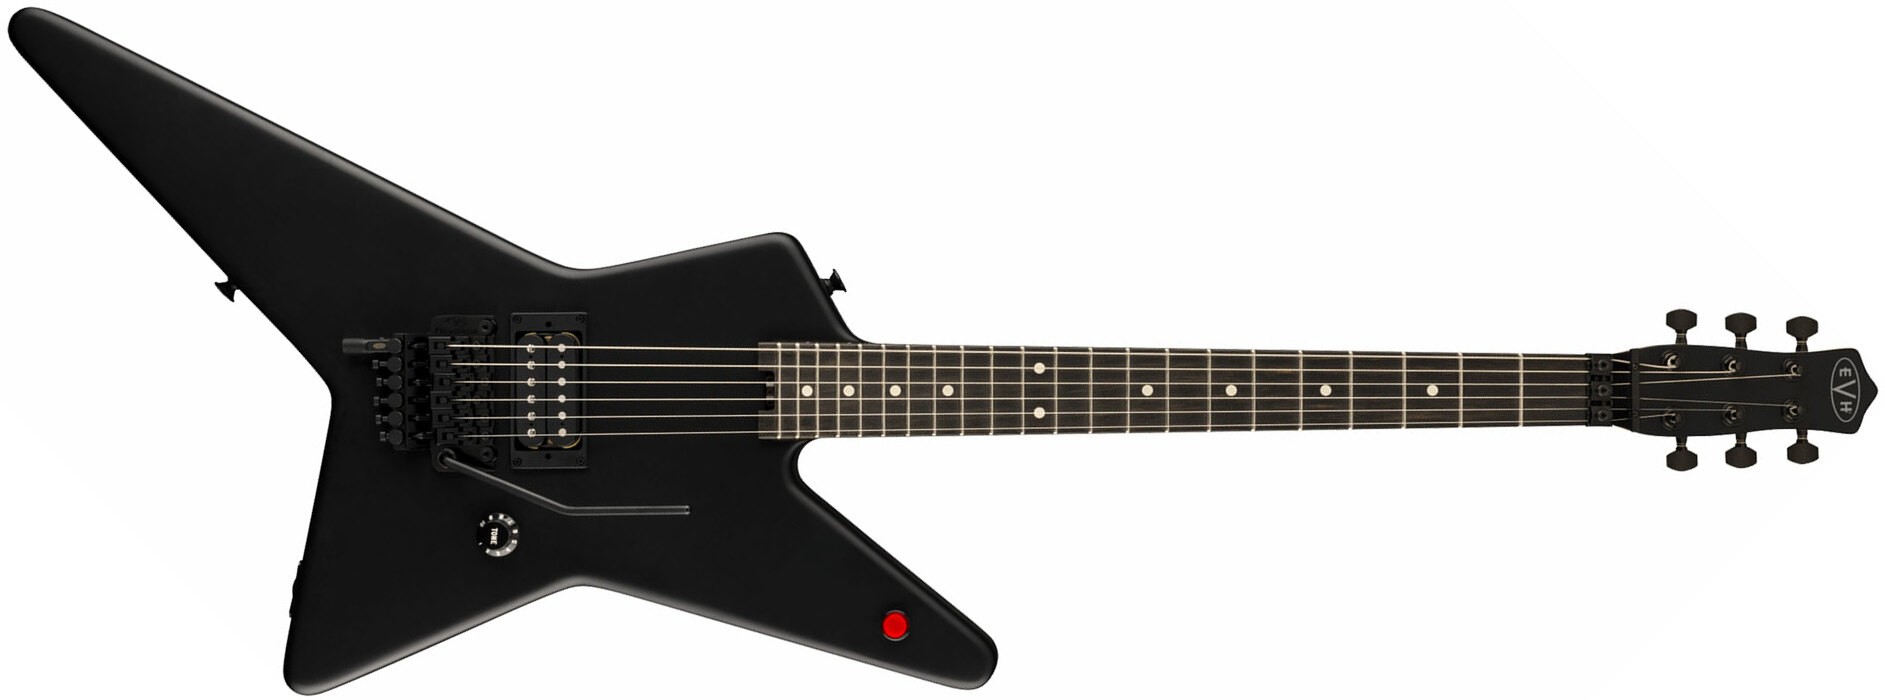 Evh Star Limited Edition 1h Fr Eb - Stealth Black - Guitarra electrica metalica - Main picture